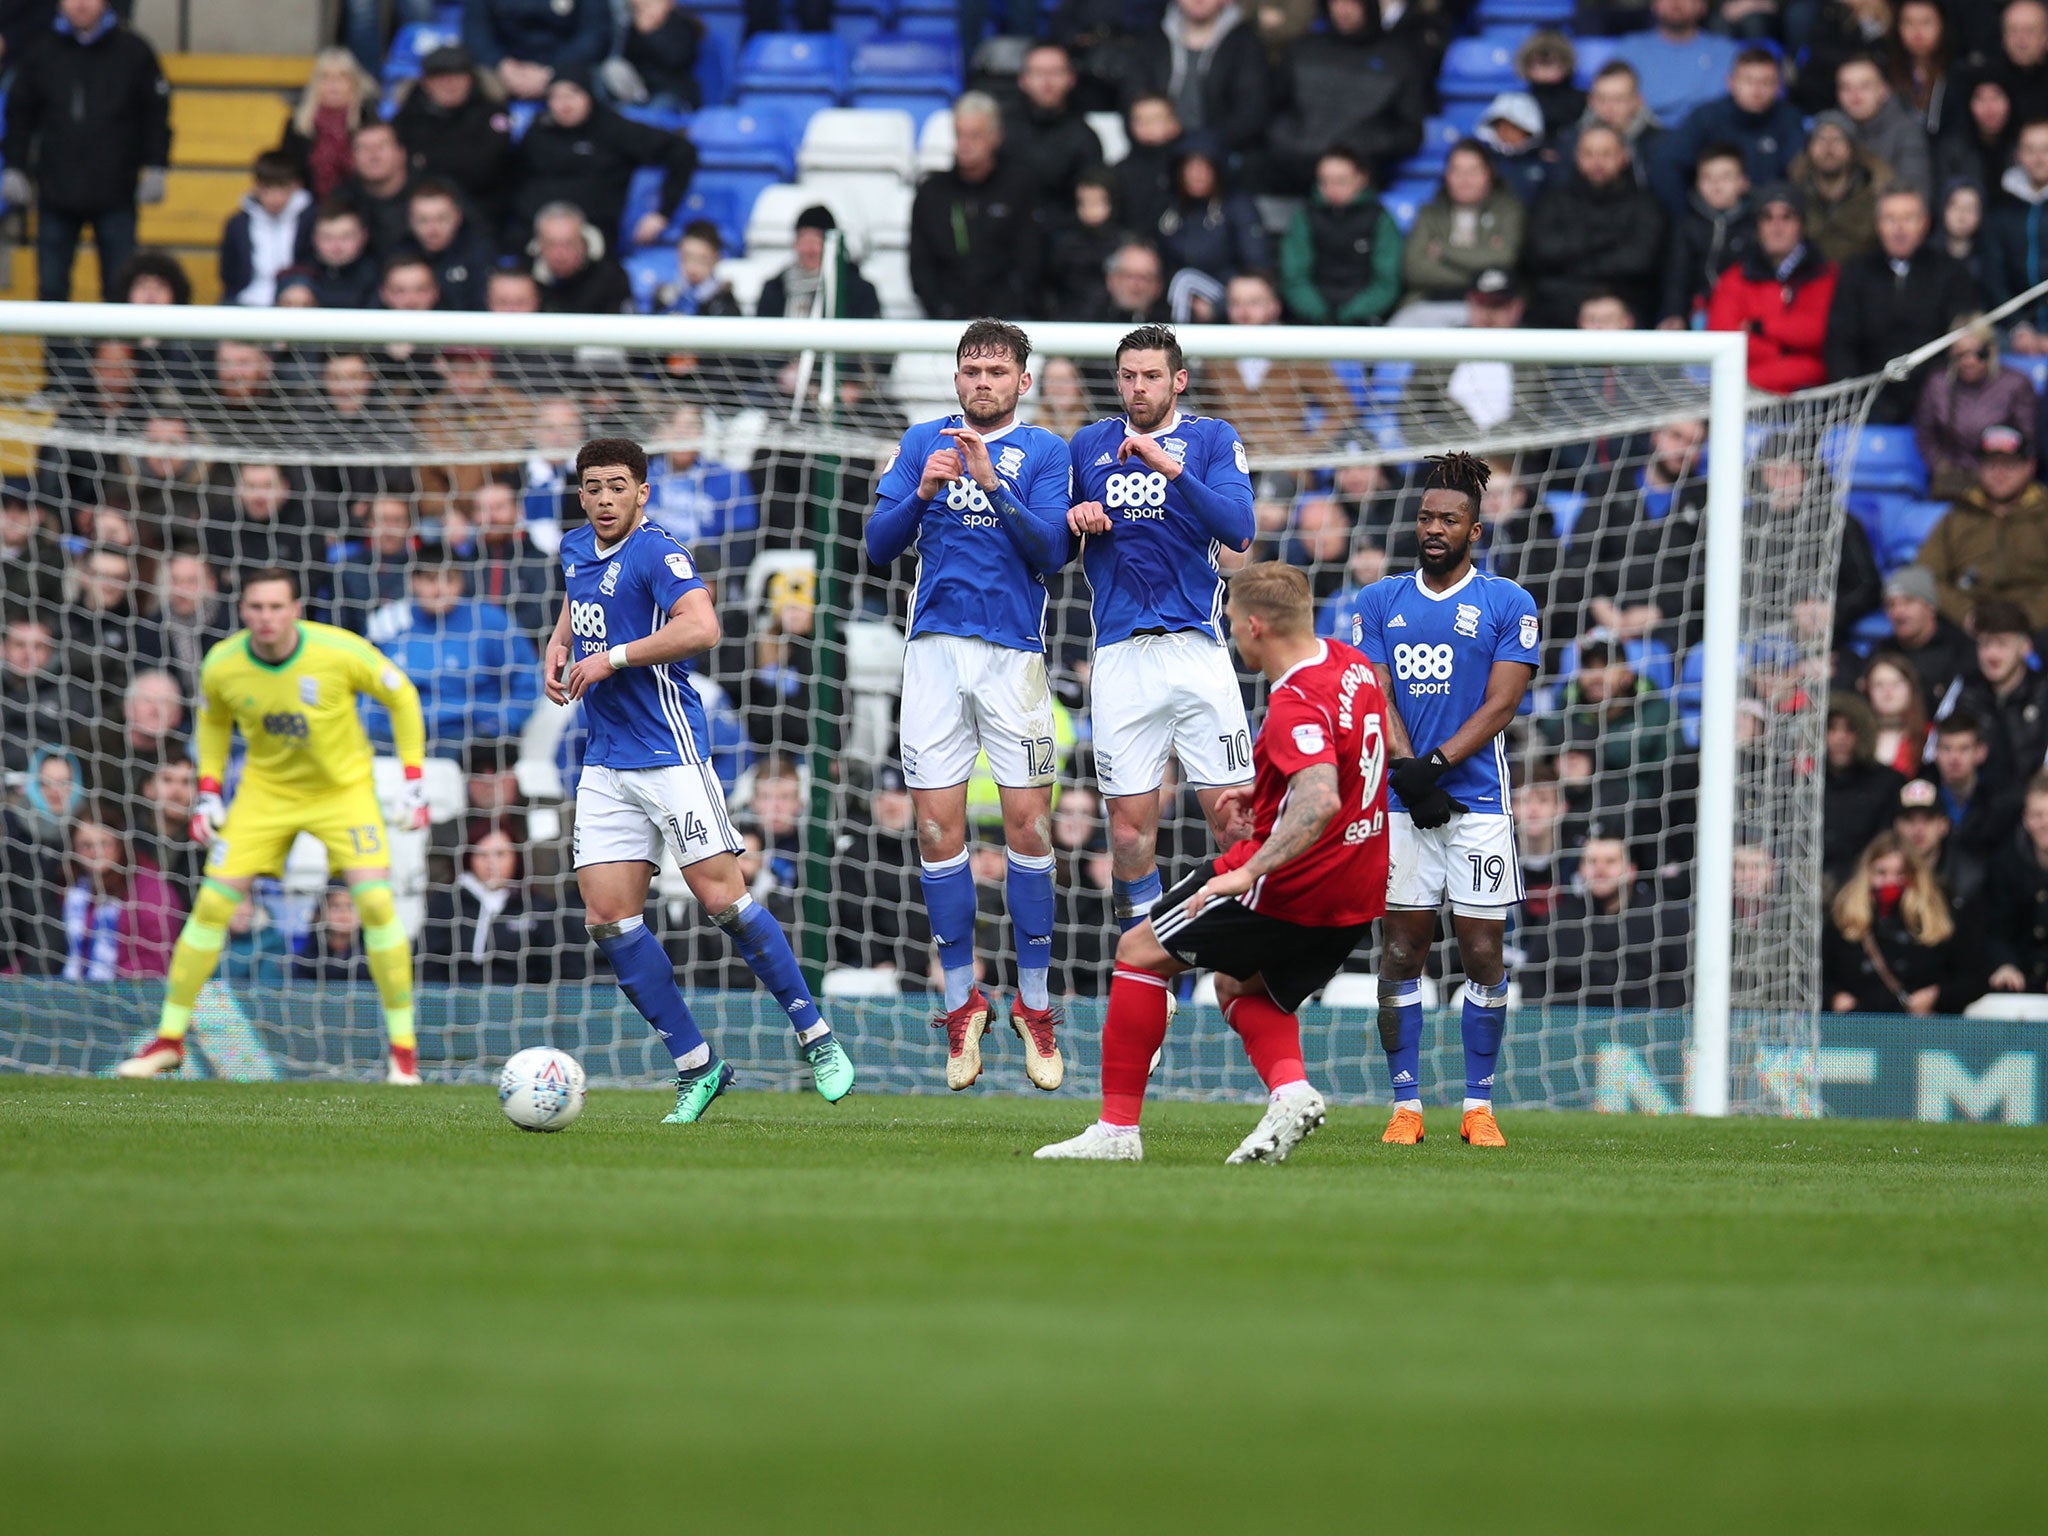 Martyn Waghorn with a free kick for Ipswich